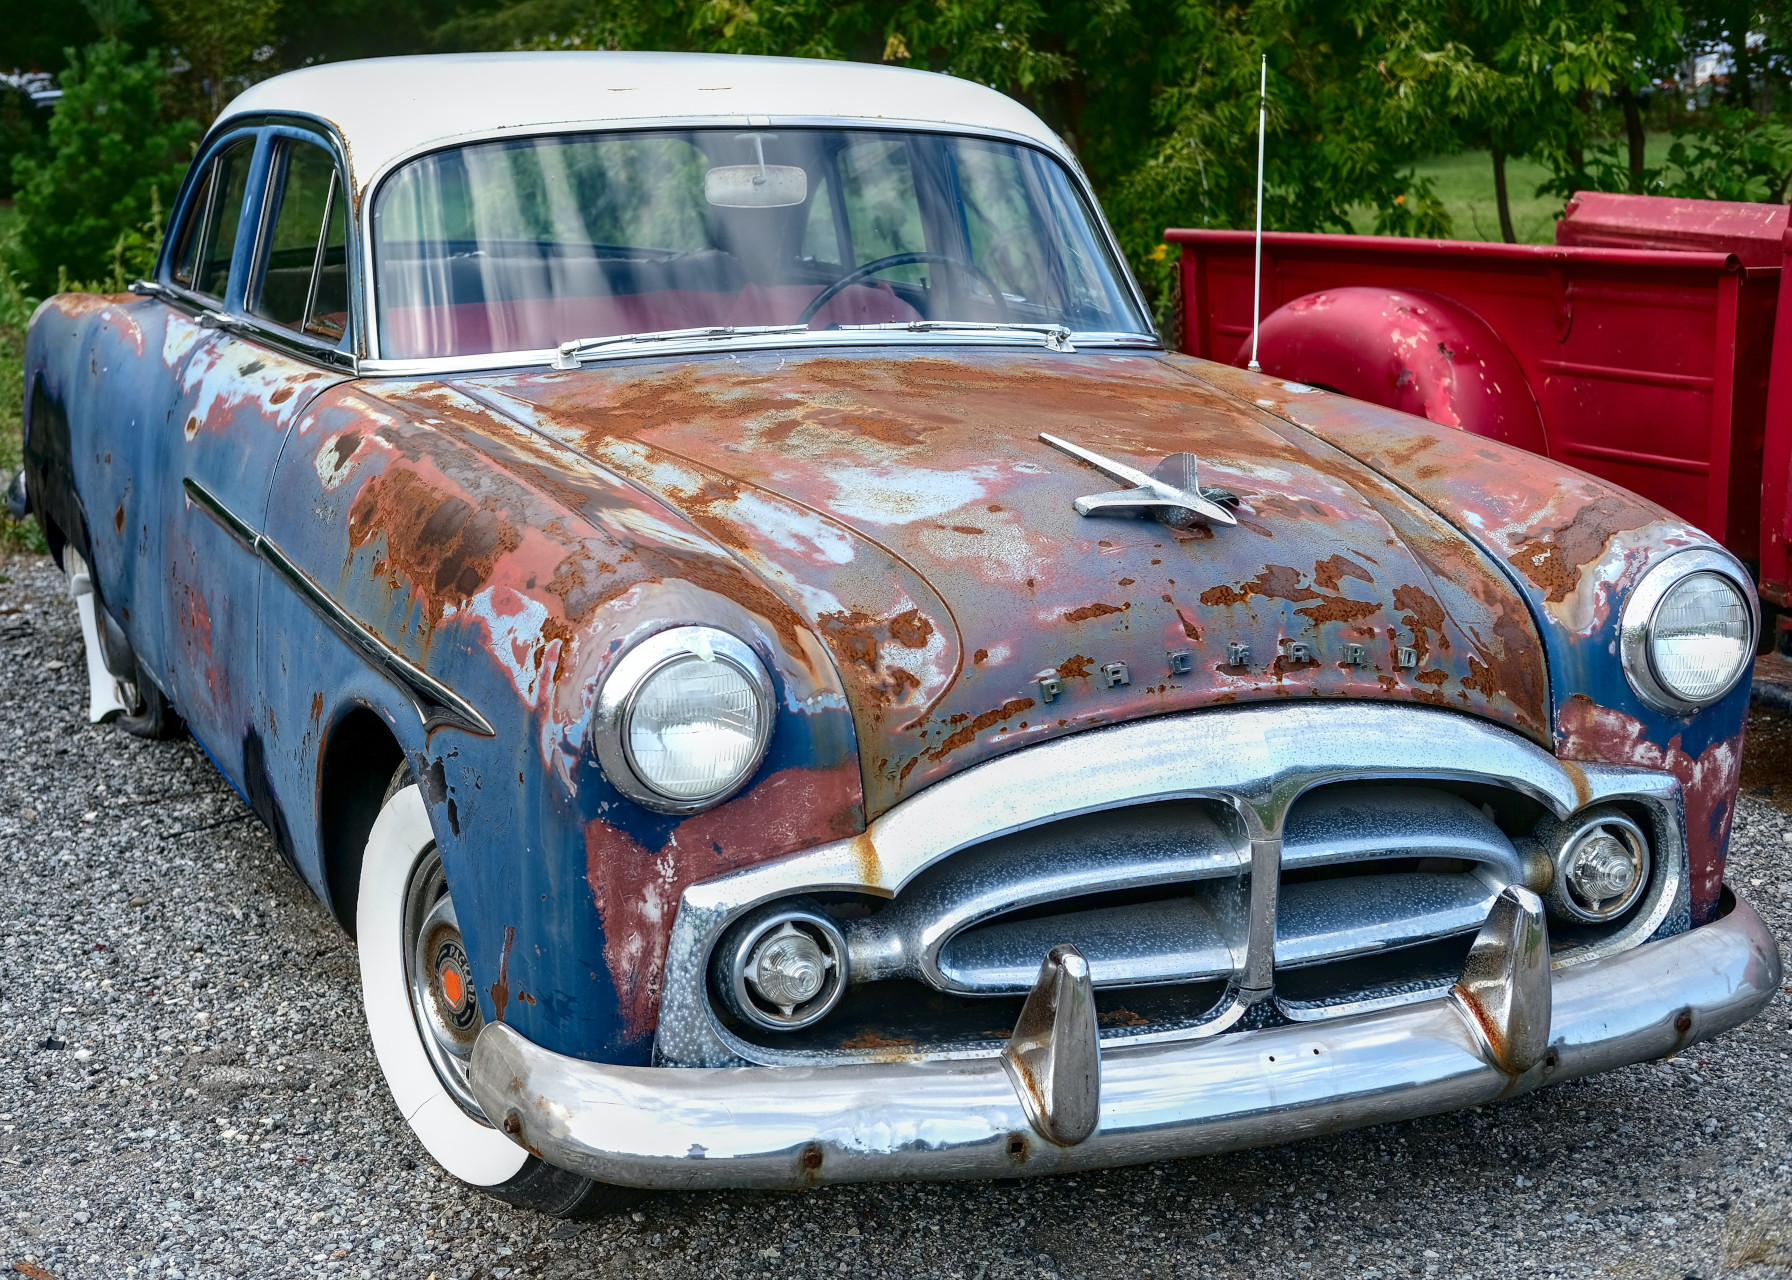  Rusted barn find Packard